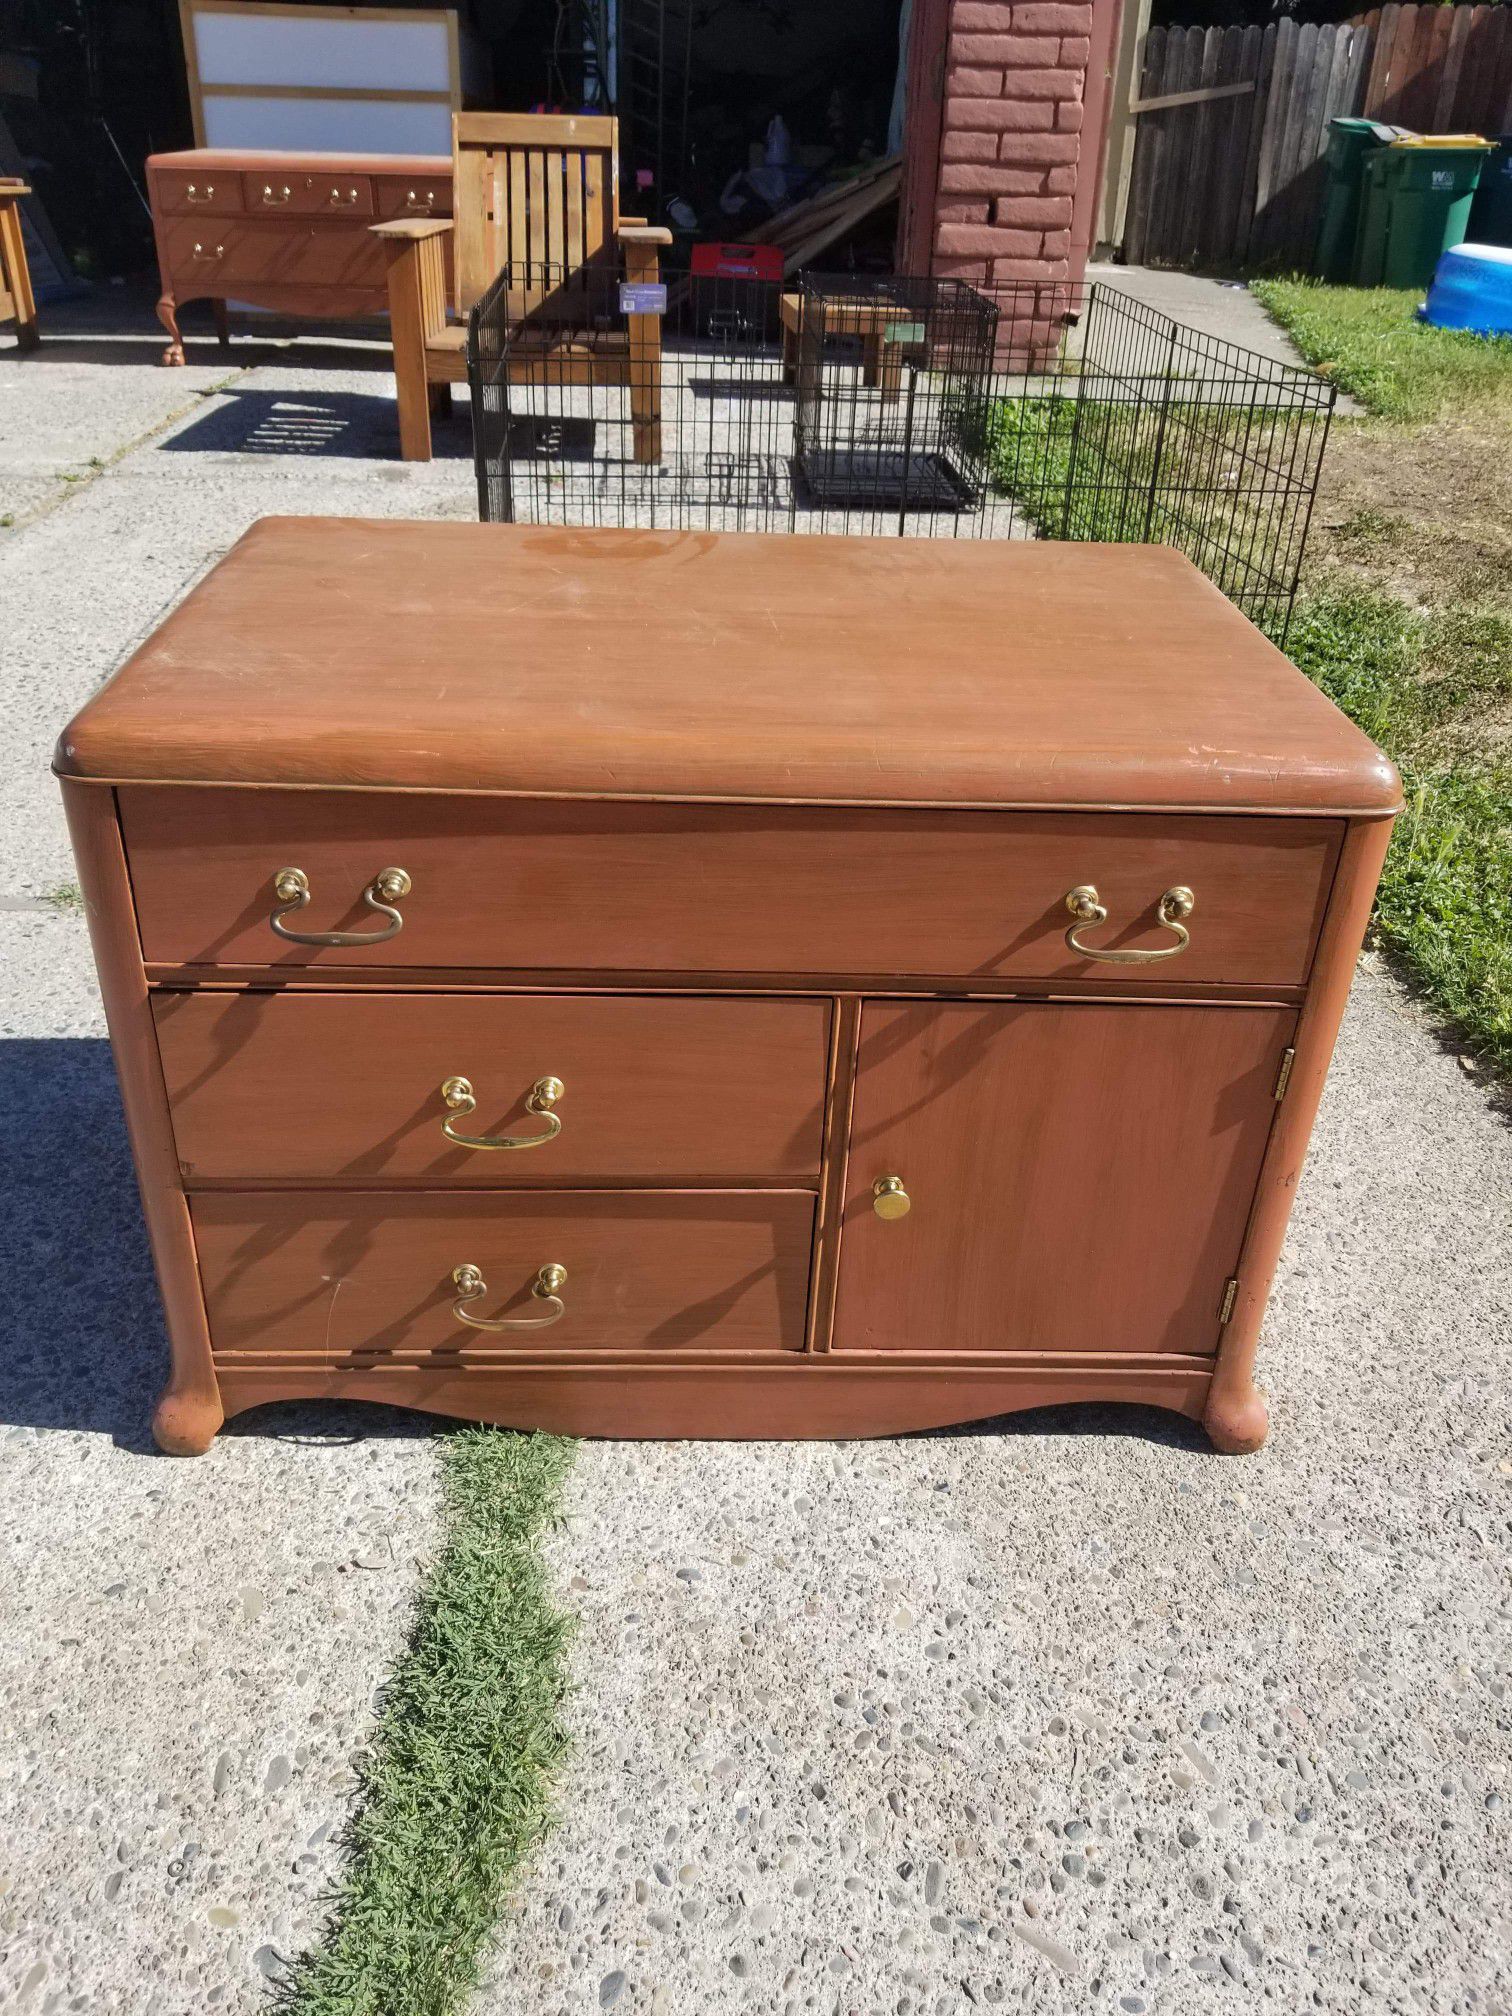 Small antique dresser. Measurements are 2 feet tall, 34 inches long 21 inches deep